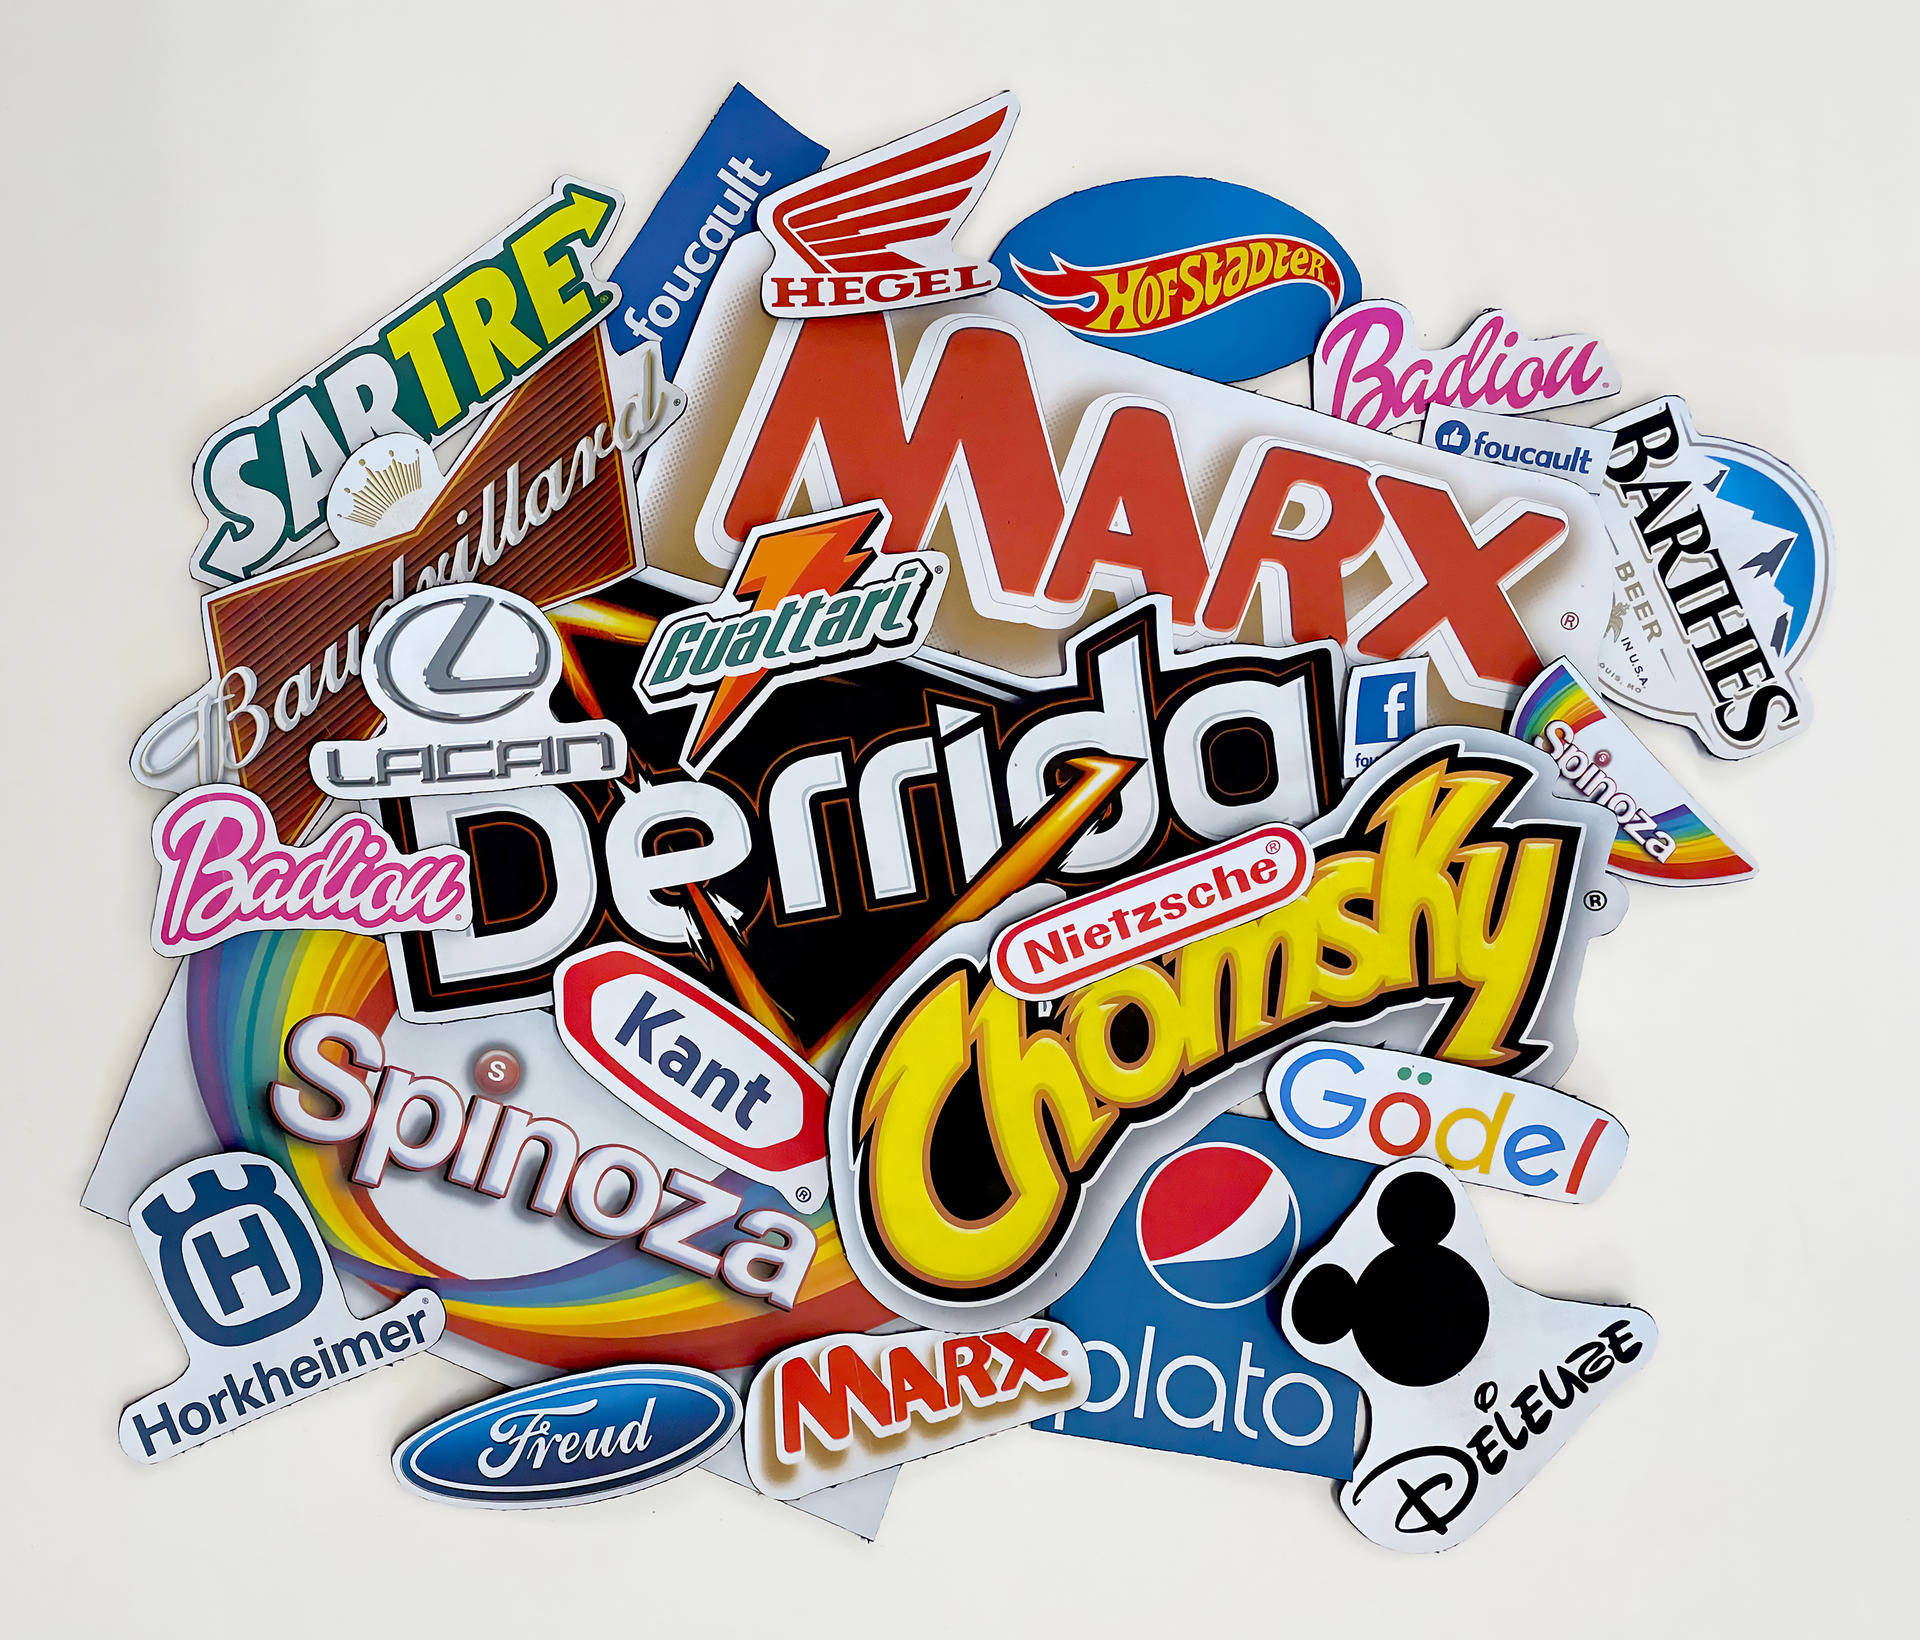 A stack of patches with logos of common brands edited to replace the brand name with a theorist's name.